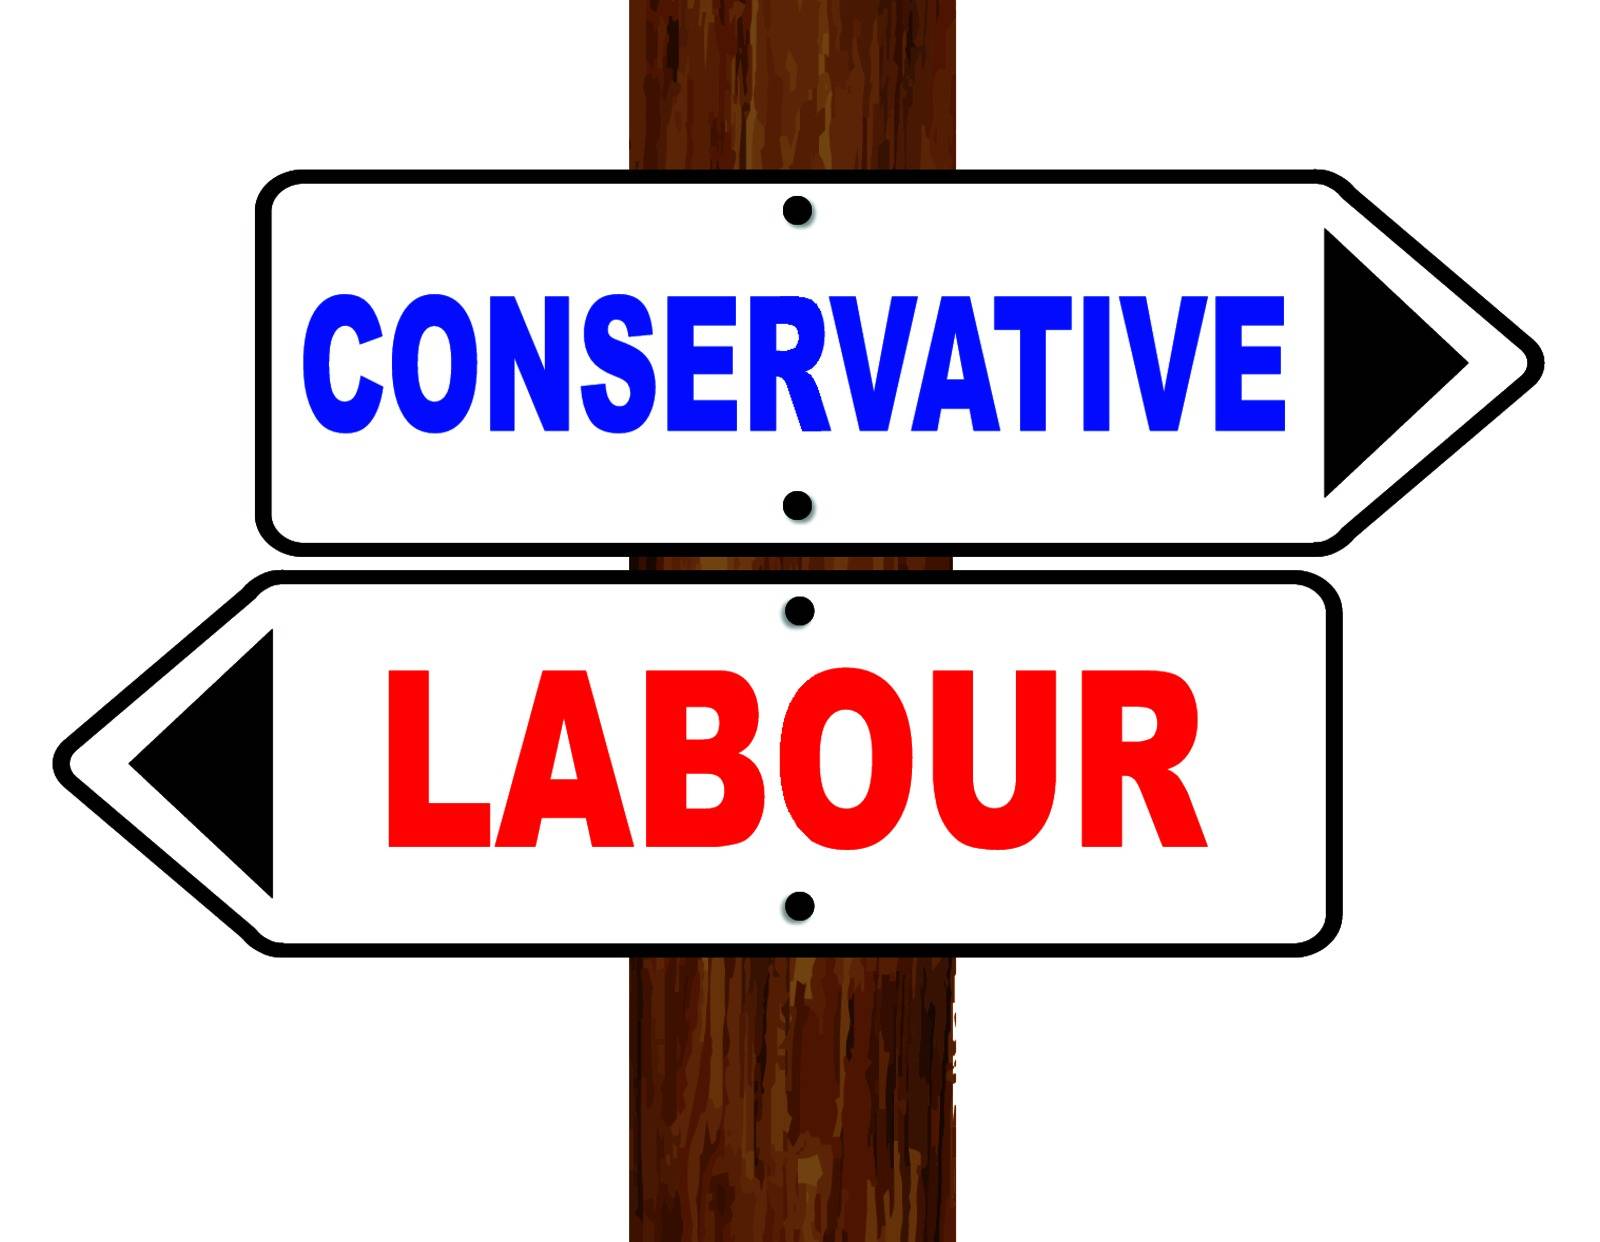 White and black labour and conservative signs with red and blue text fixed to a wooden pole over a white background